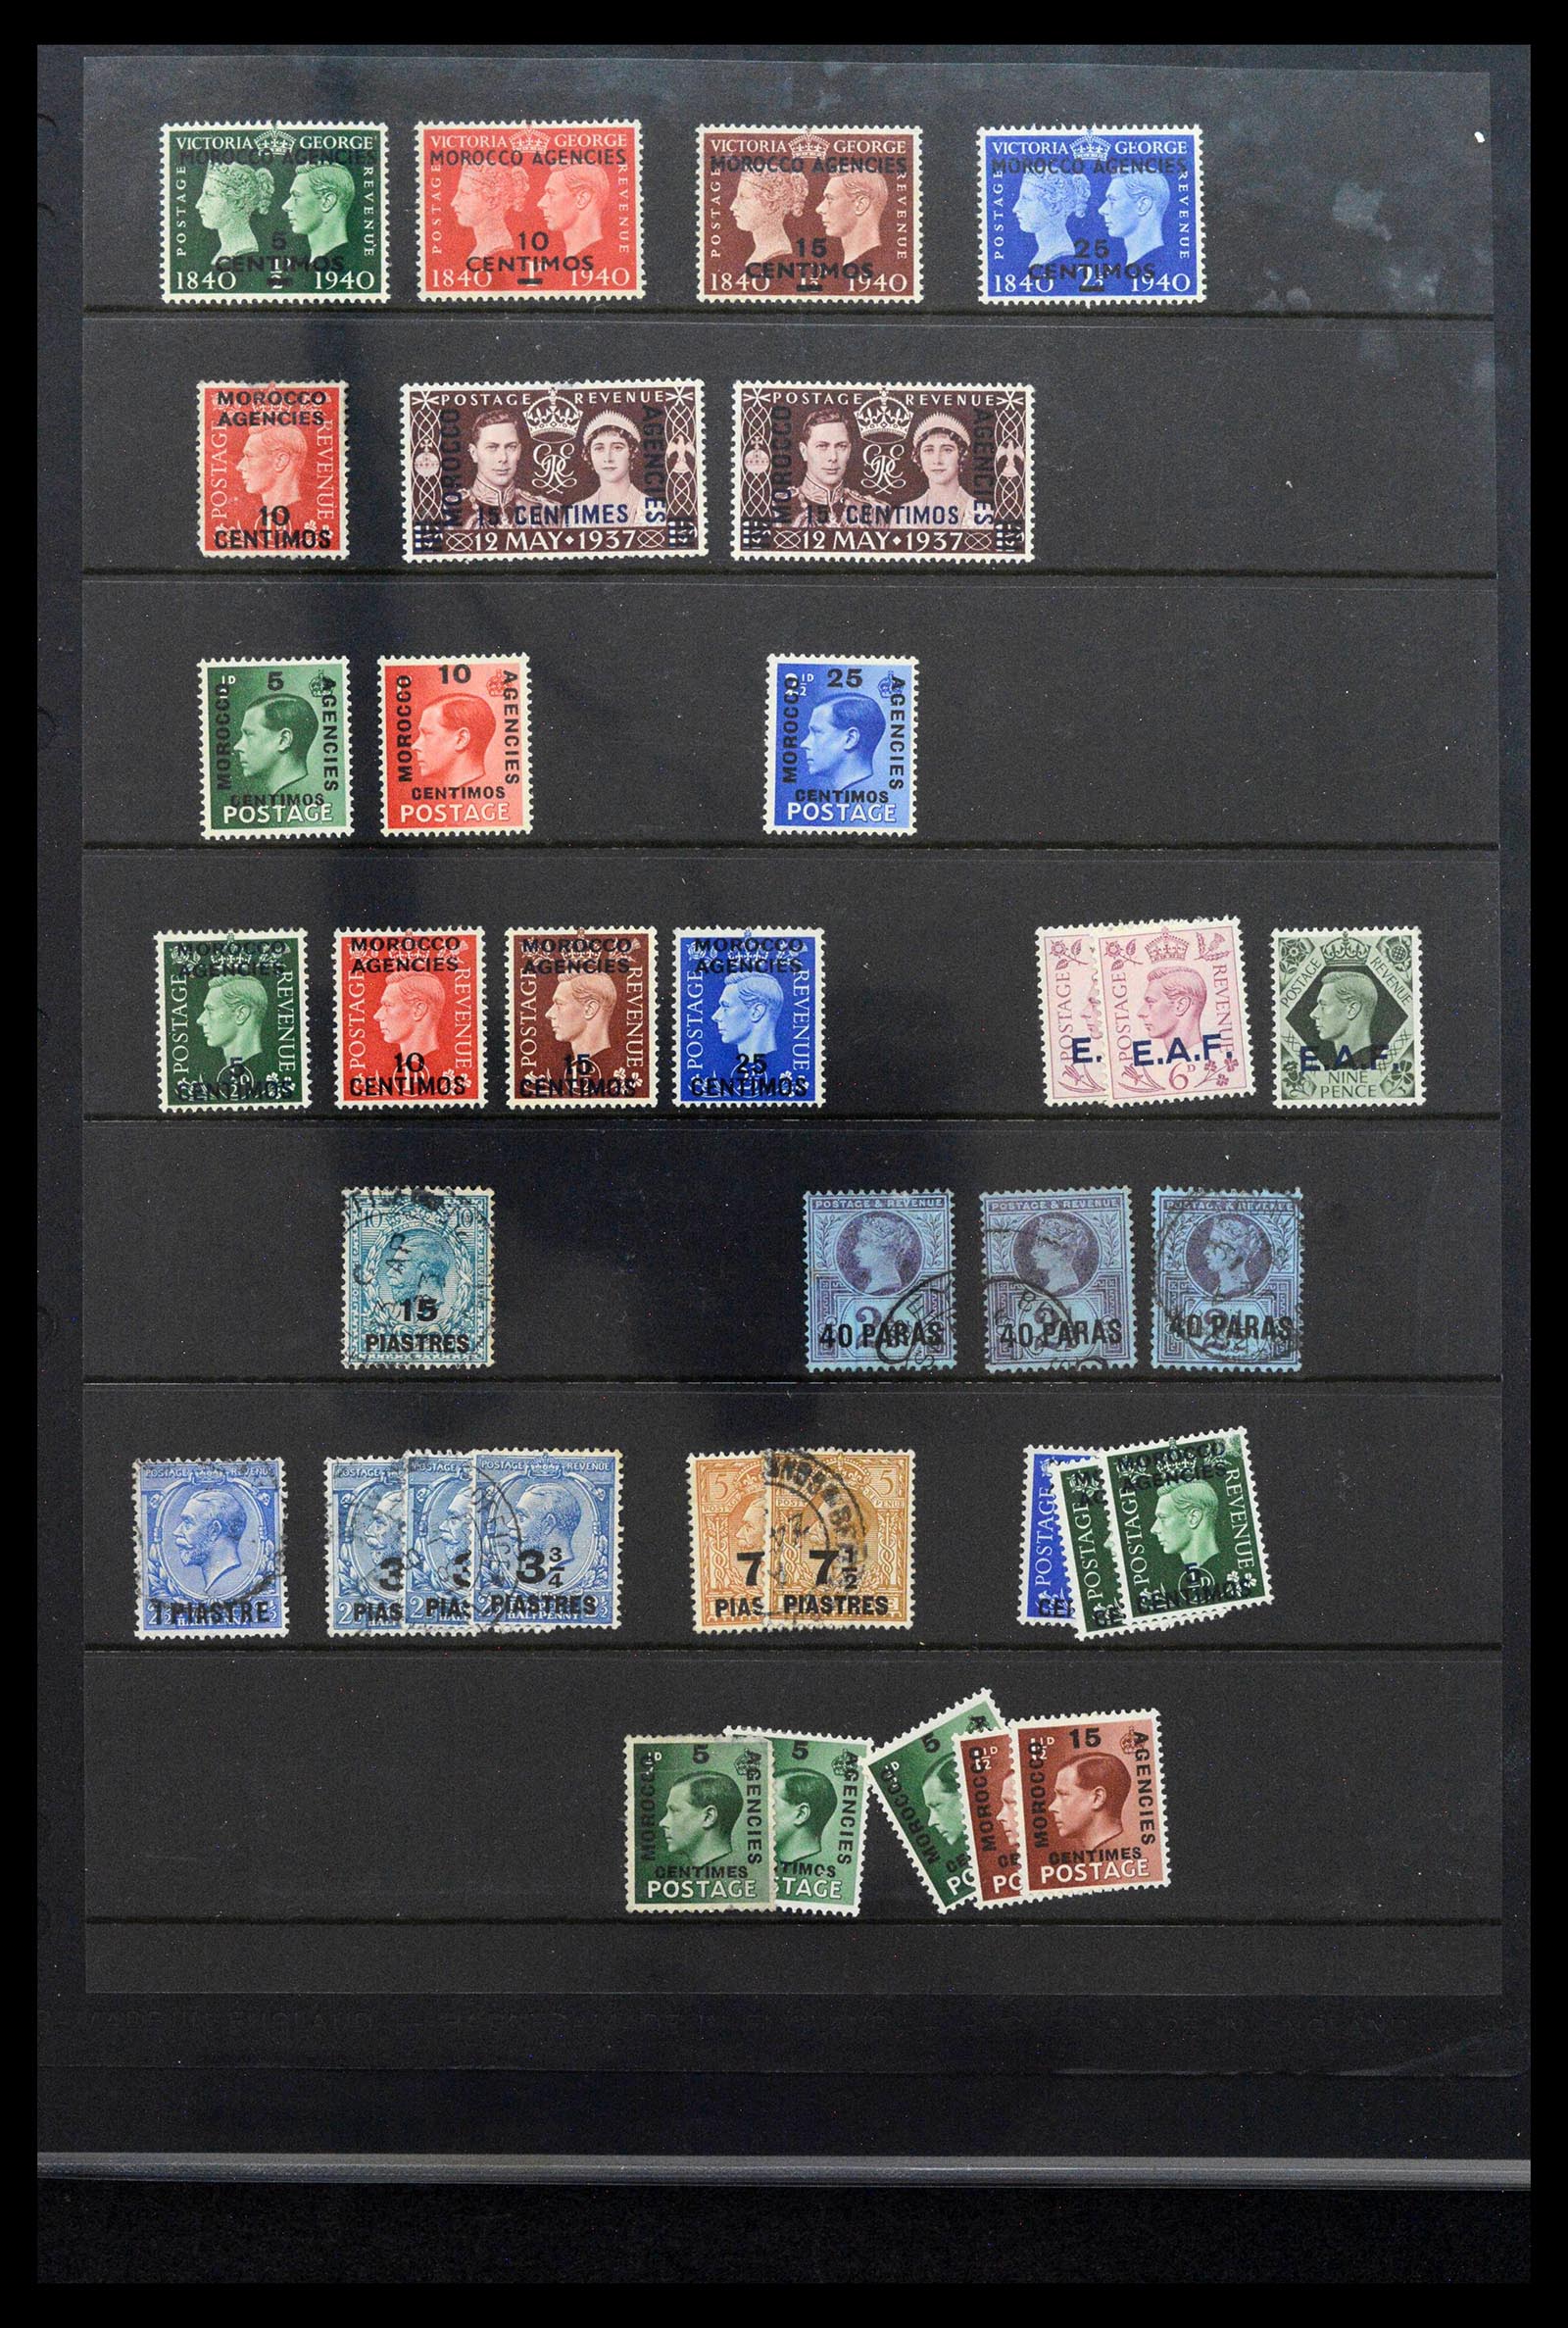 39378 0040 - Stamp collection 39378 British offices abroad 1885-1957.